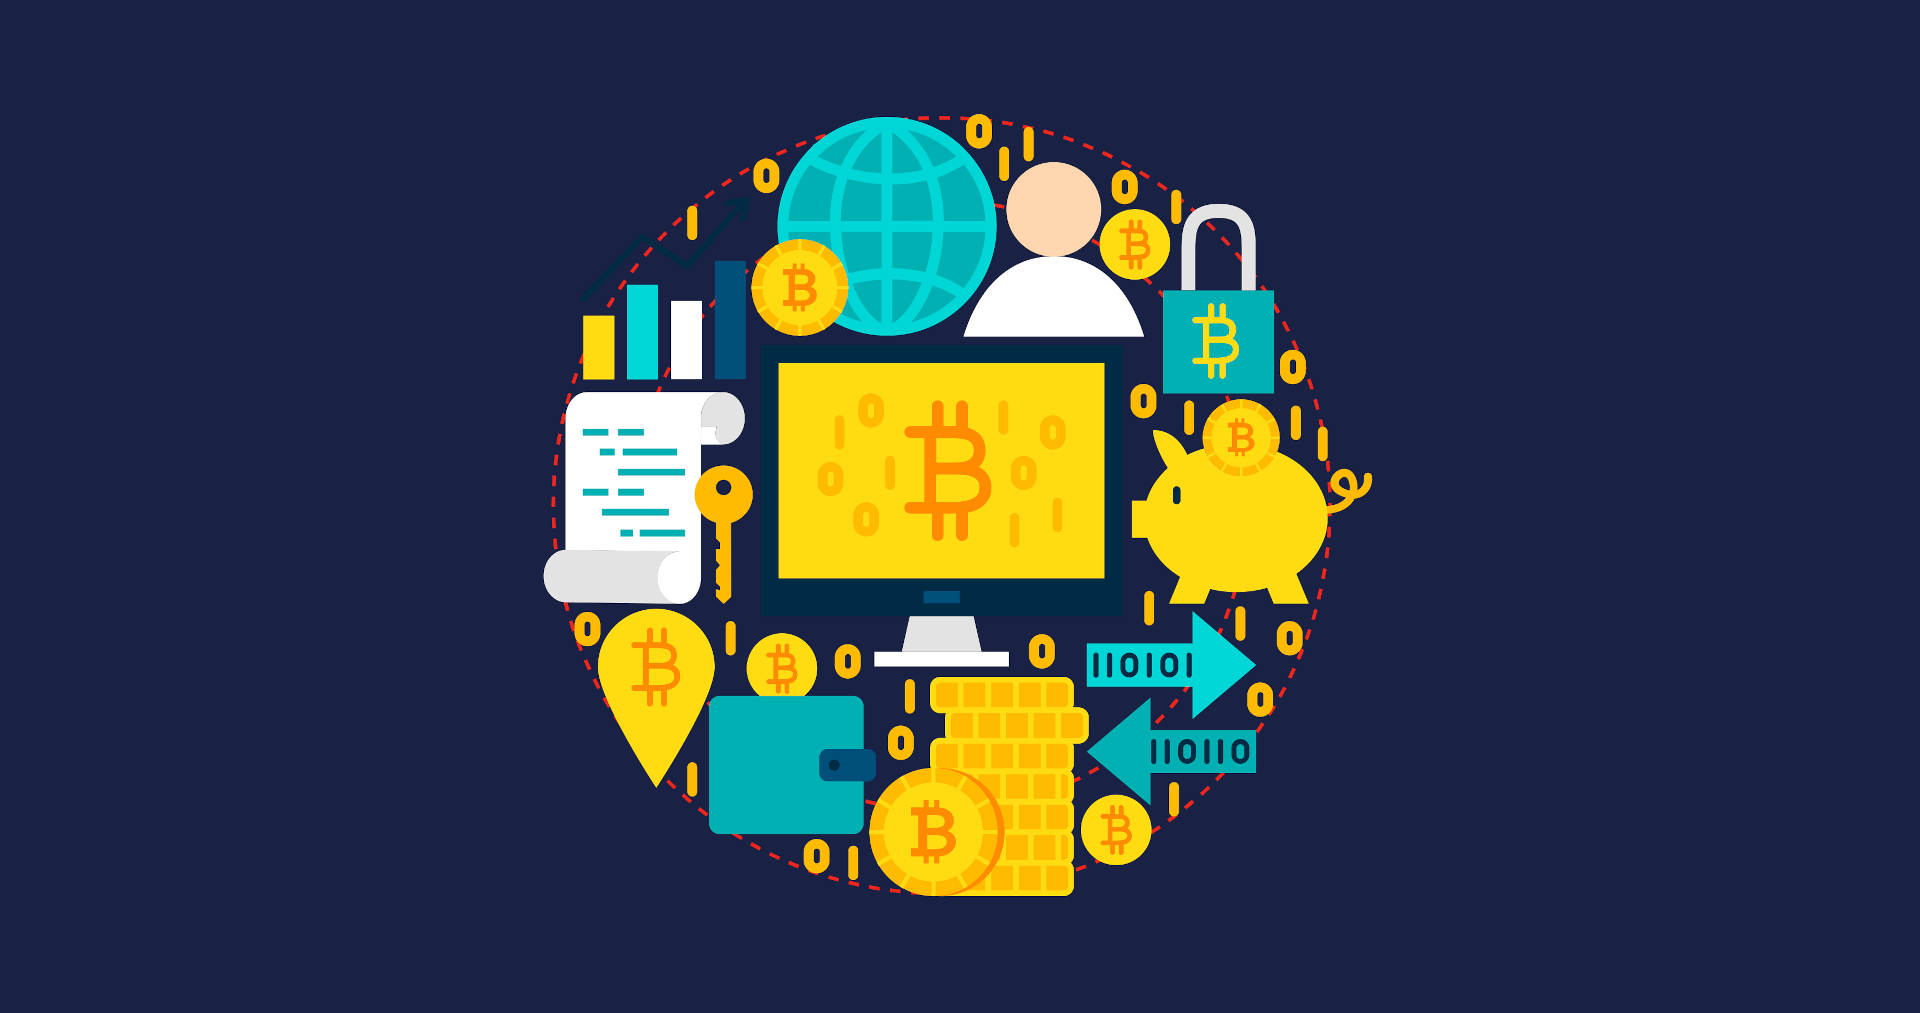 Adopting Blockchain for Secure Transactions